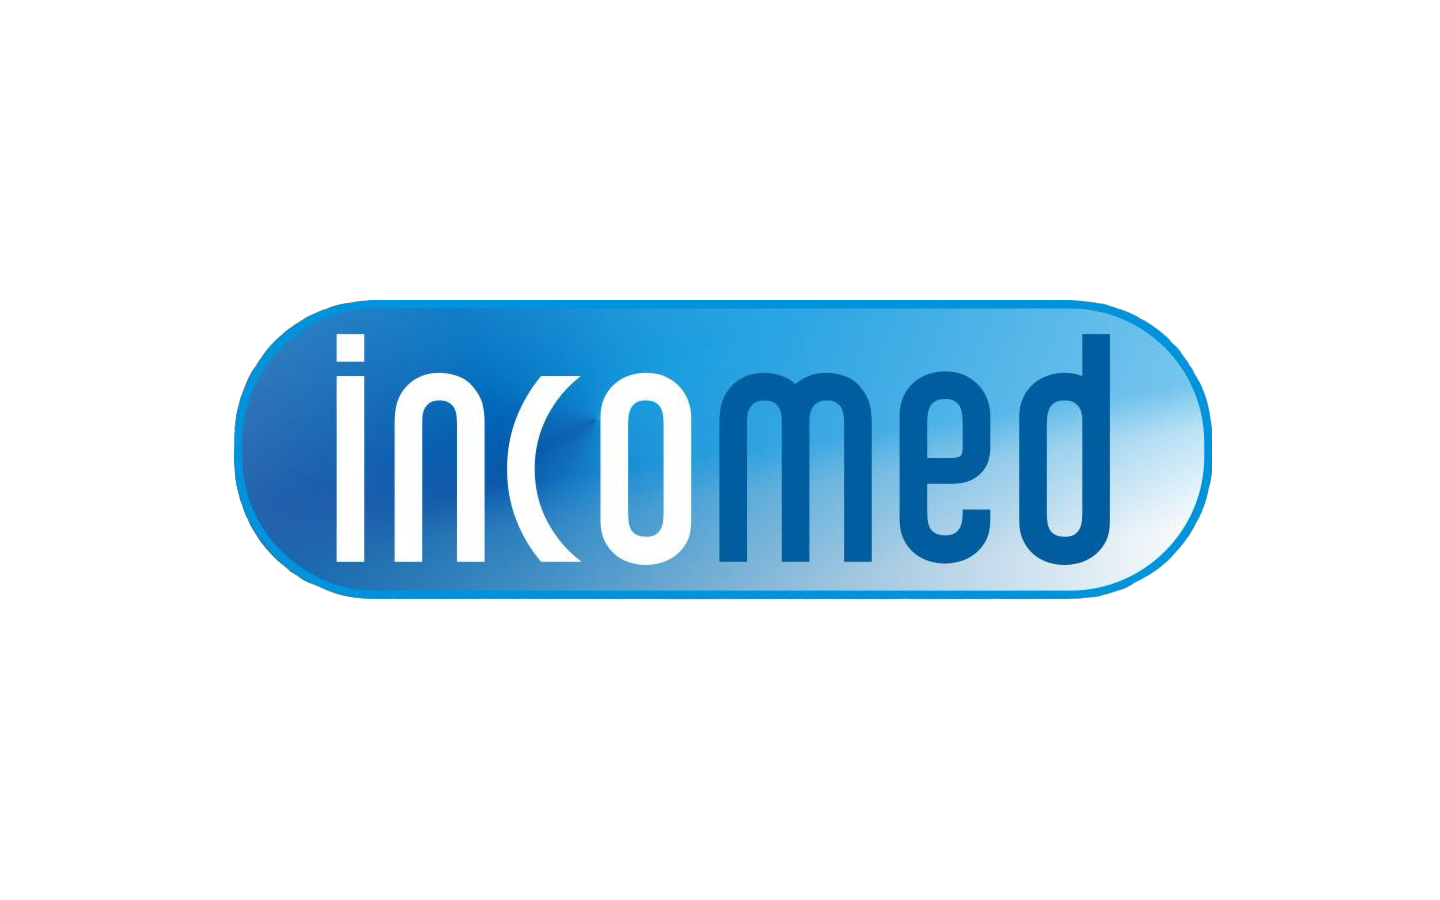 incomed